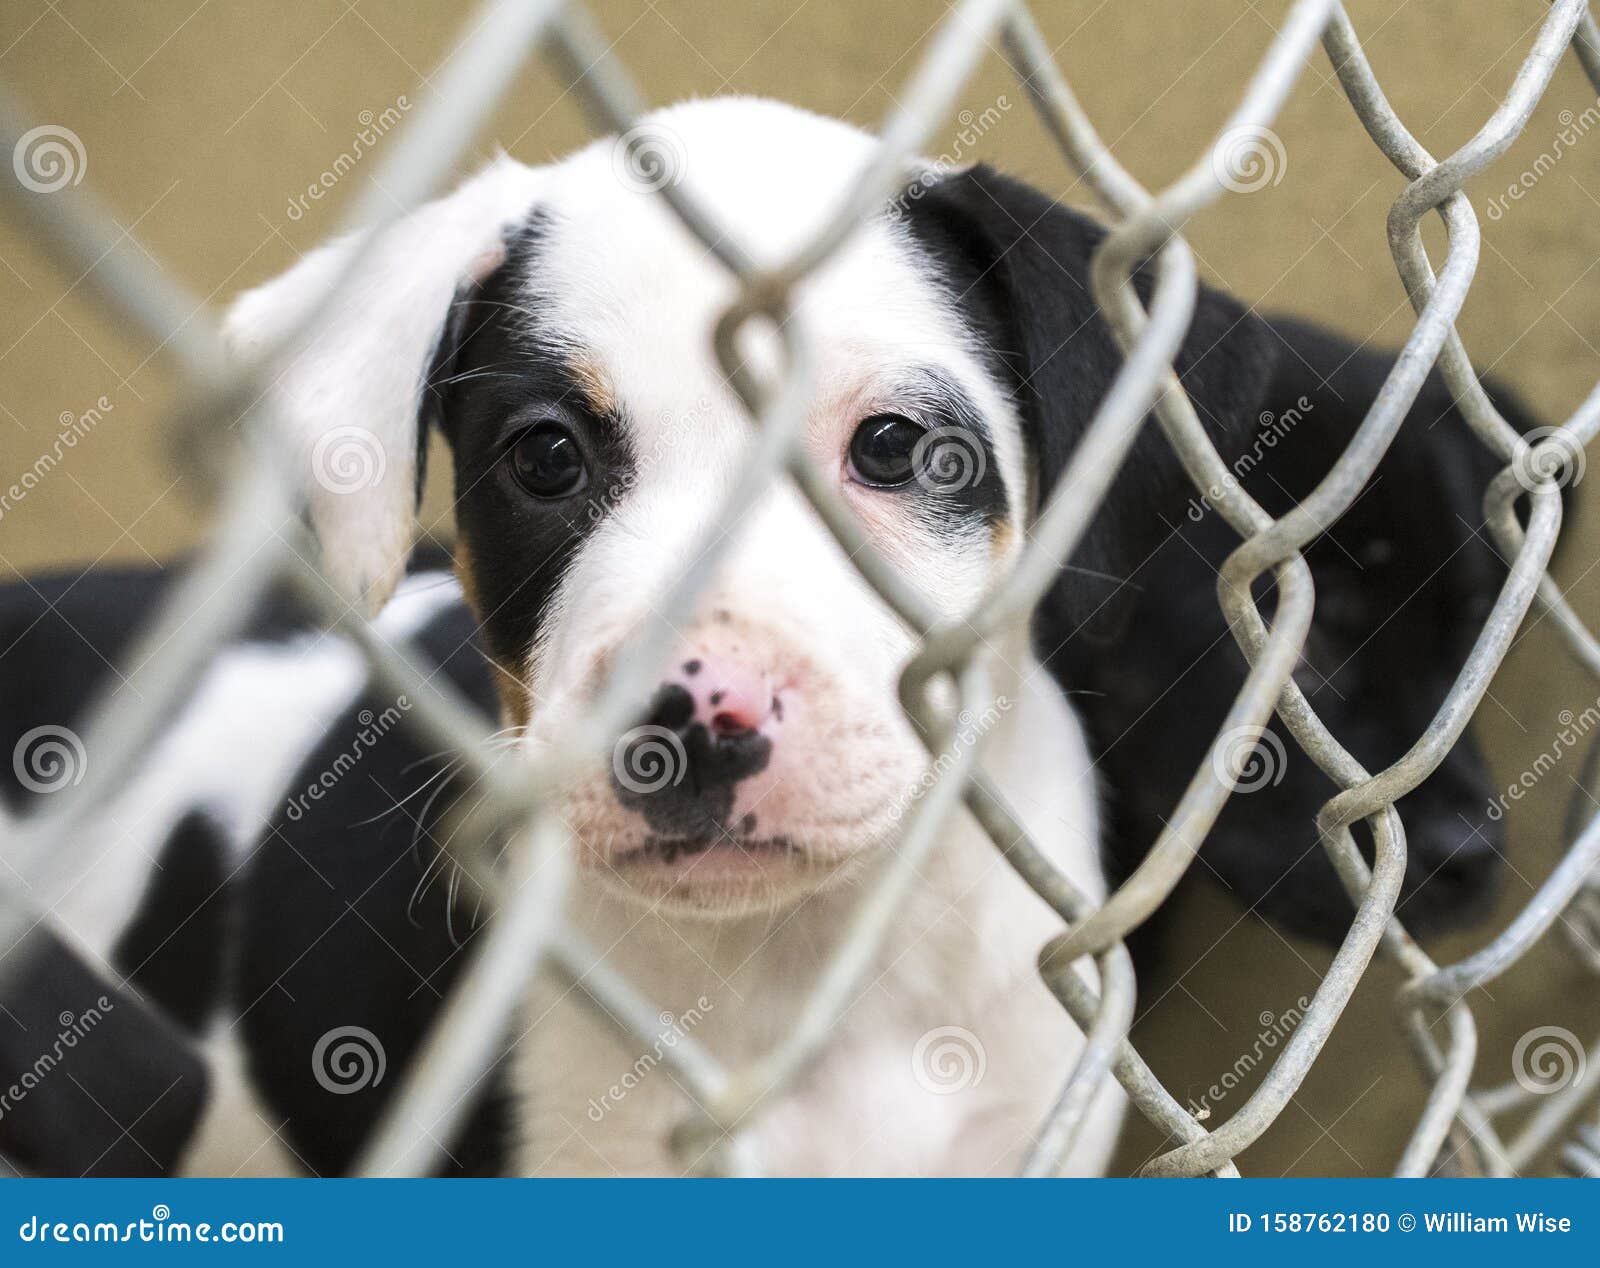 Cute Puppies in Chain Link Kennel in the Dog Pound Waiting for Adoption  Stock Photo - Image of chain, kennel: 158762180